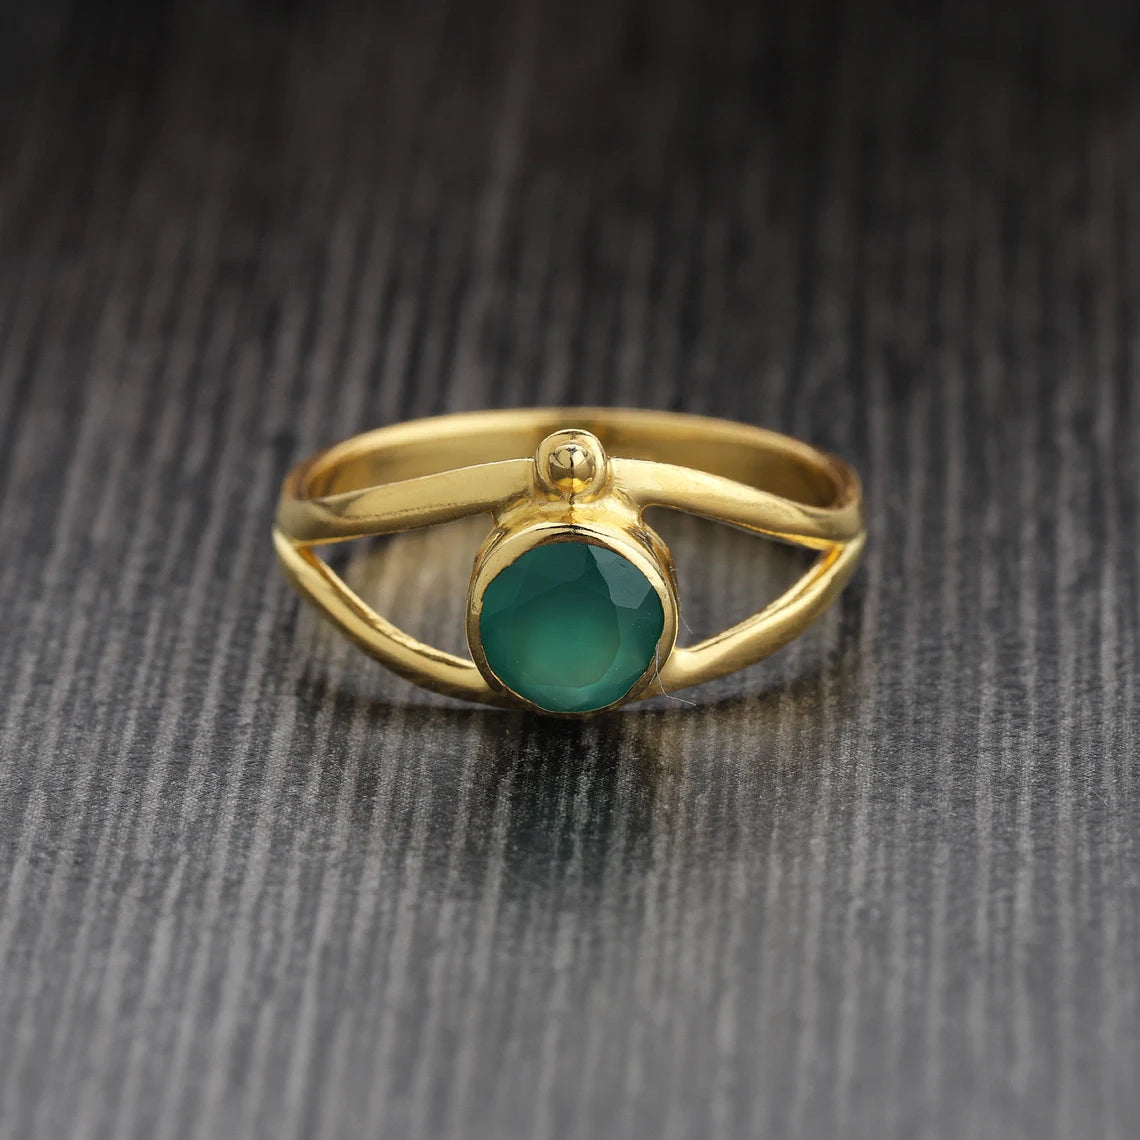 Round Green Onyx Gold Ring,Natural Green Onyx Gemstone Ring,Green Onyx Gold Ring 18k Gold Plated Sterling Silver Ring Handmade Ring